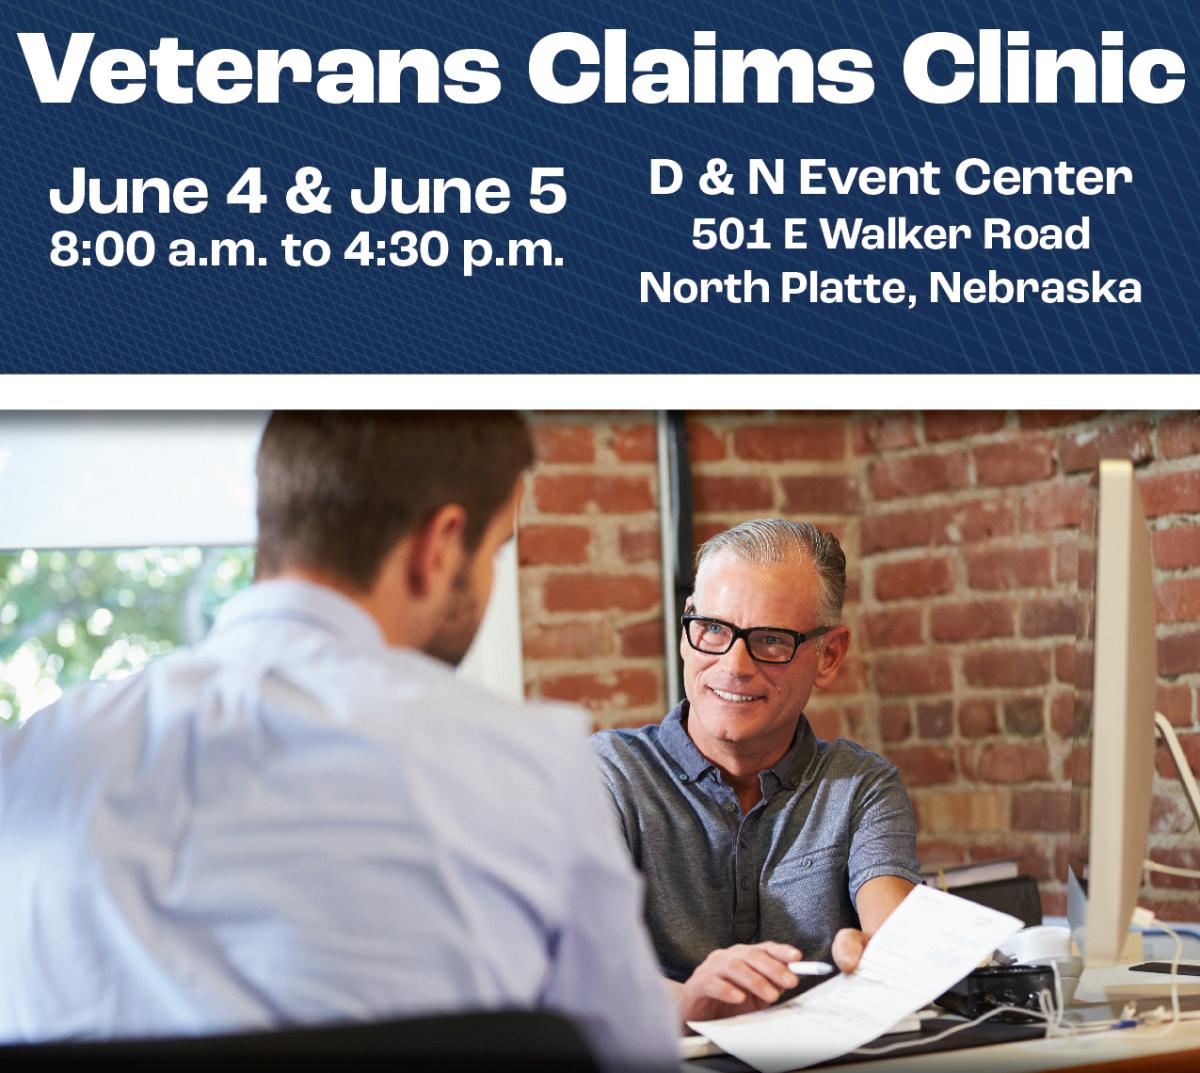 Veterans Claims Clinic Dates and Times